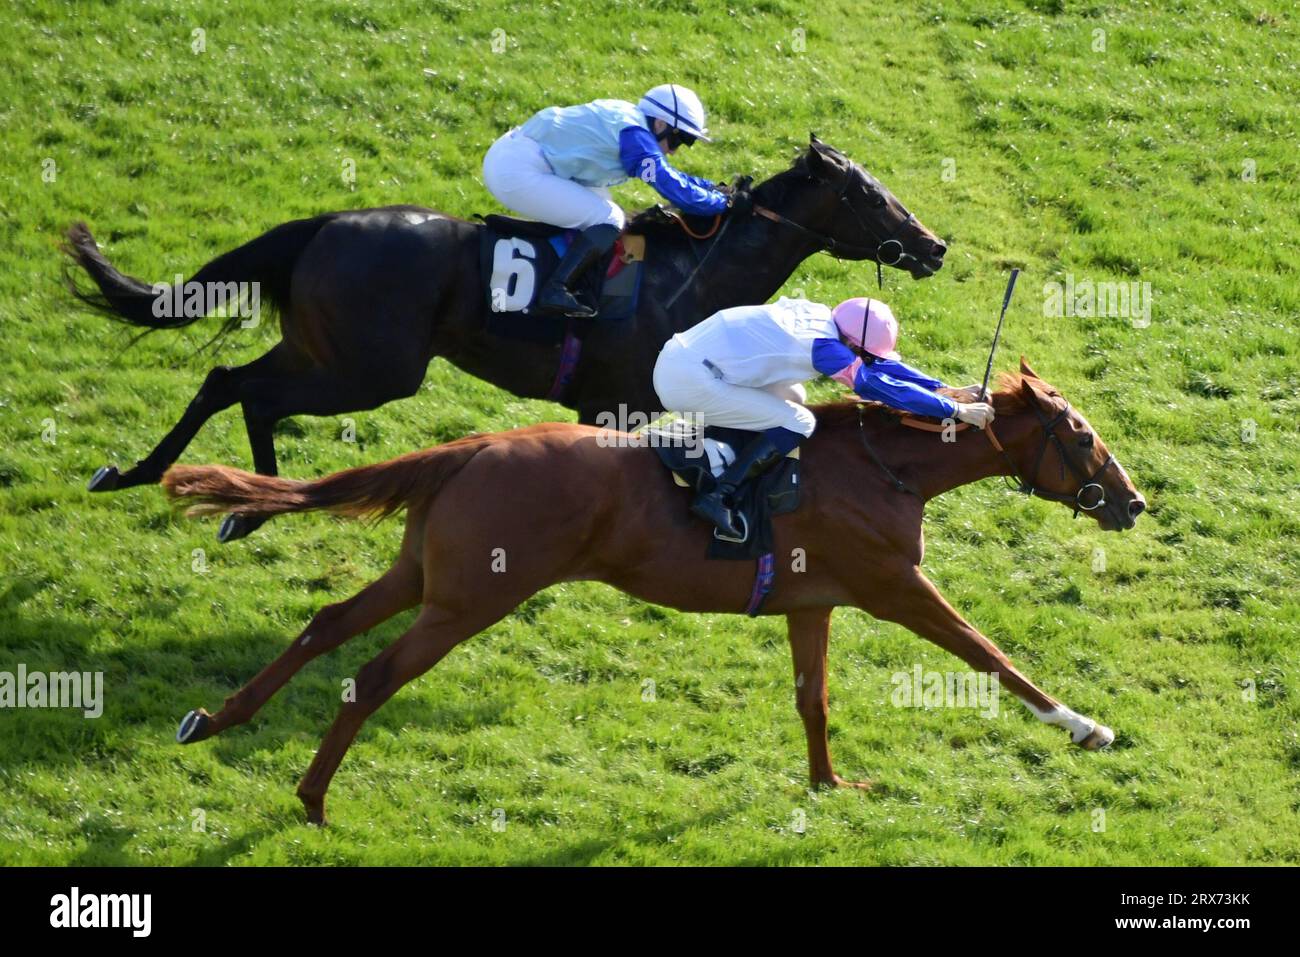 Newbury, UK. 23rd September 2023. Feigning Madness (pink cap), ridden by Hector Crouch wins the 15.50 Norris Hill School EBF Novice Stakes ahead of New Chelsea, ridden by Laura Pearson at Newbury Racecourse, UK. Credit: Paul Blake/Alamy Live News. Stock Photo